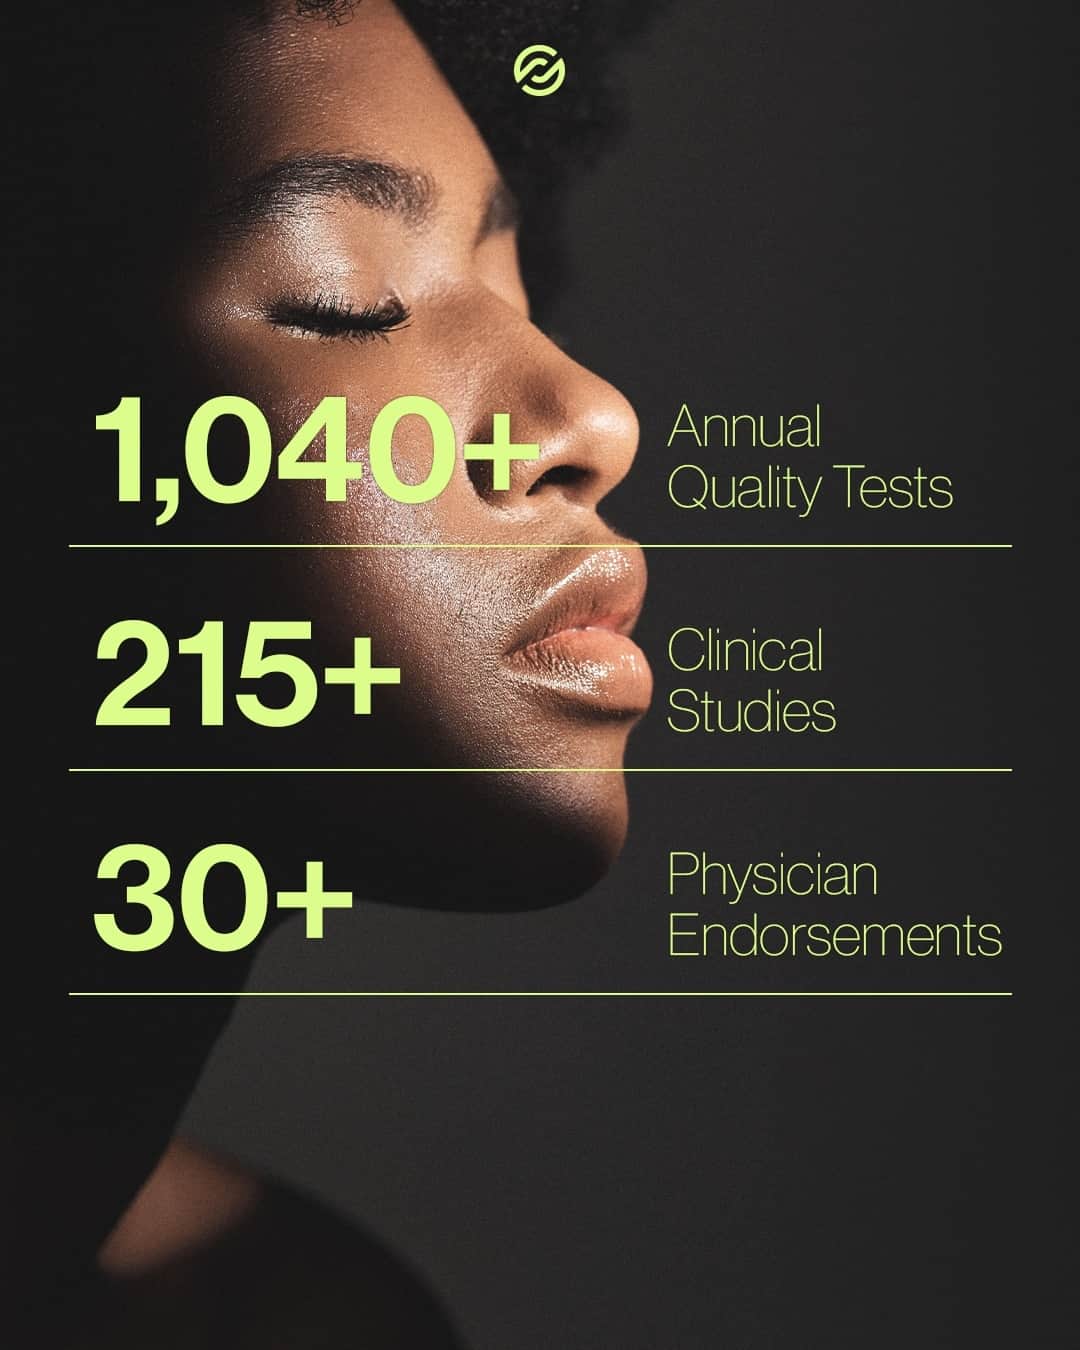 ARIIX Officialのインスタグラム：「Our commitment to quality is backed by 1,040+ annual quality tests, 215+ clinical studies and 30+ physician endorsements. You deserve nothing less!  Check out the link in our bio for more info.  #PartnerCo #Wellness #Health #HighStandards」